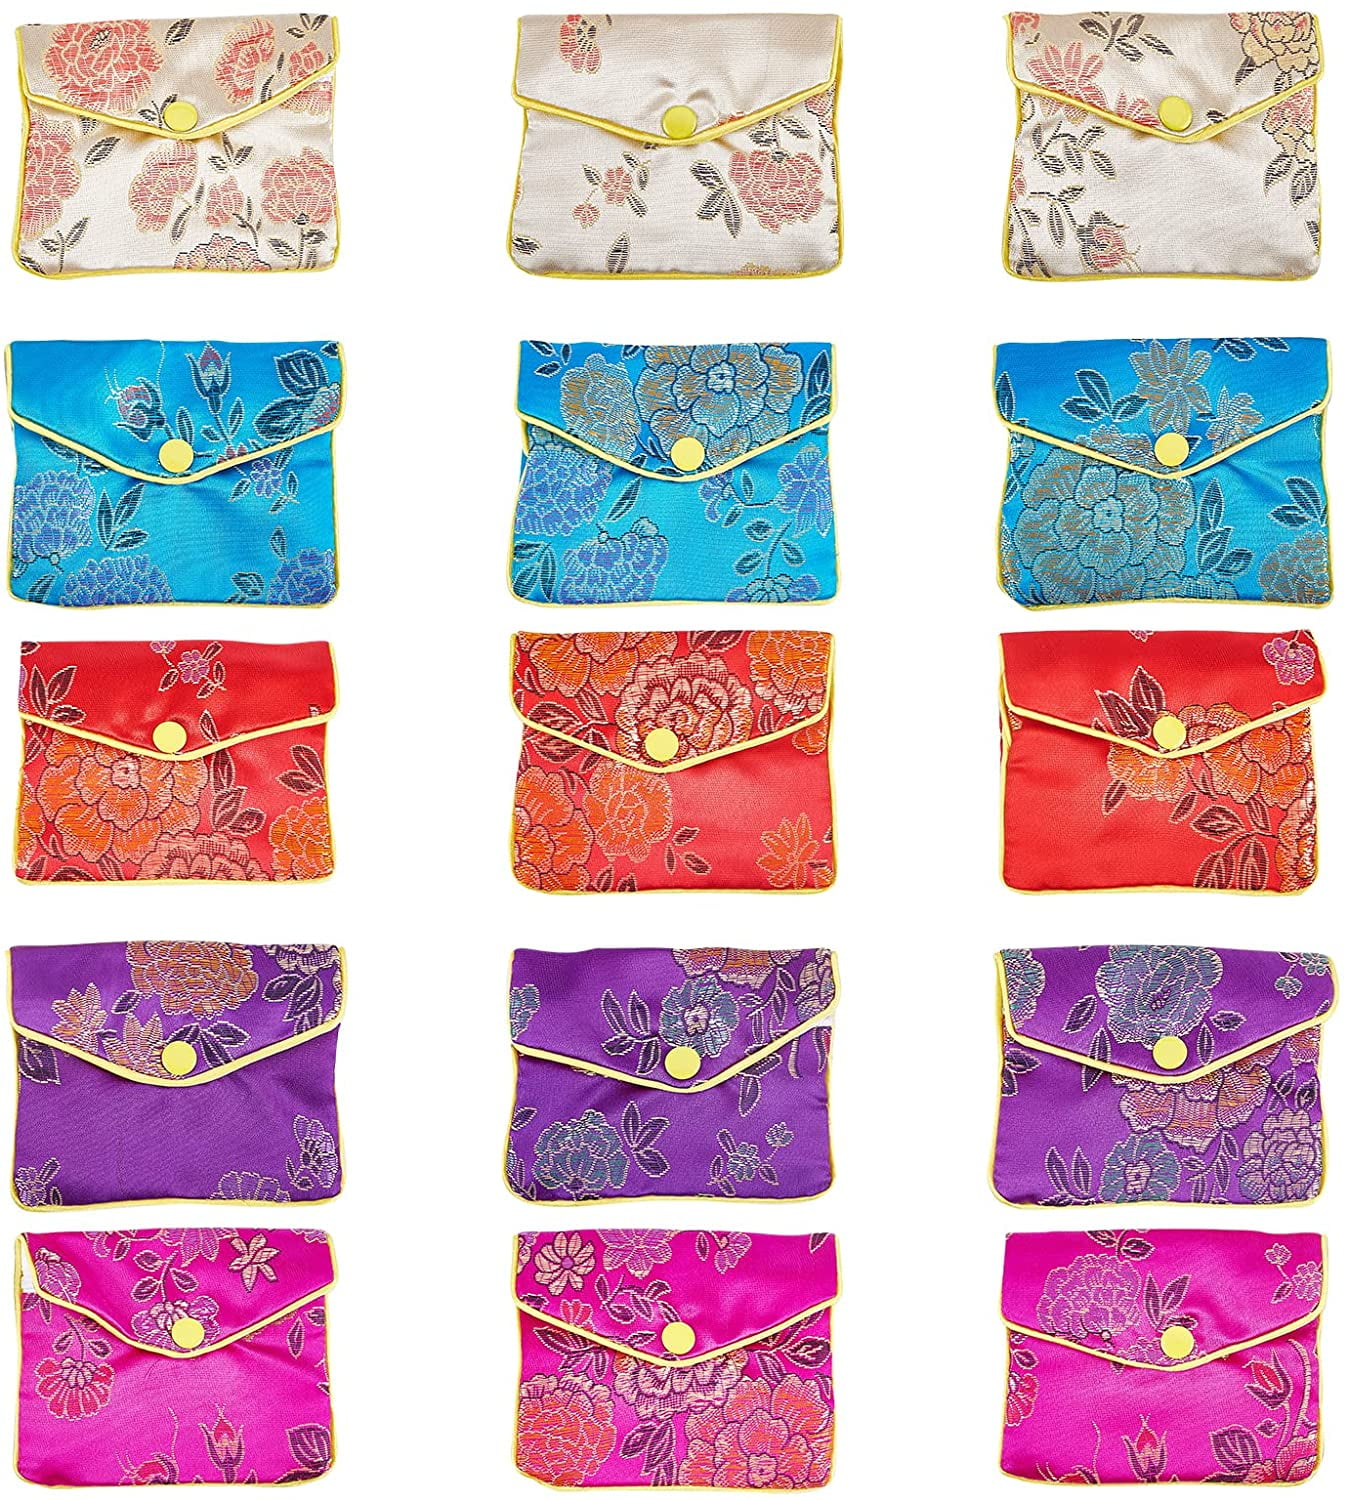 Floral Zipper Silk In Change Purse Pouch Set Small Gift Bags For Jewelry,  Chinese Credit Card Holder Silk Bag In 6x8, 8x10, And 10x12 Cm Sizes  Whol317K From Ibezo, $61.51